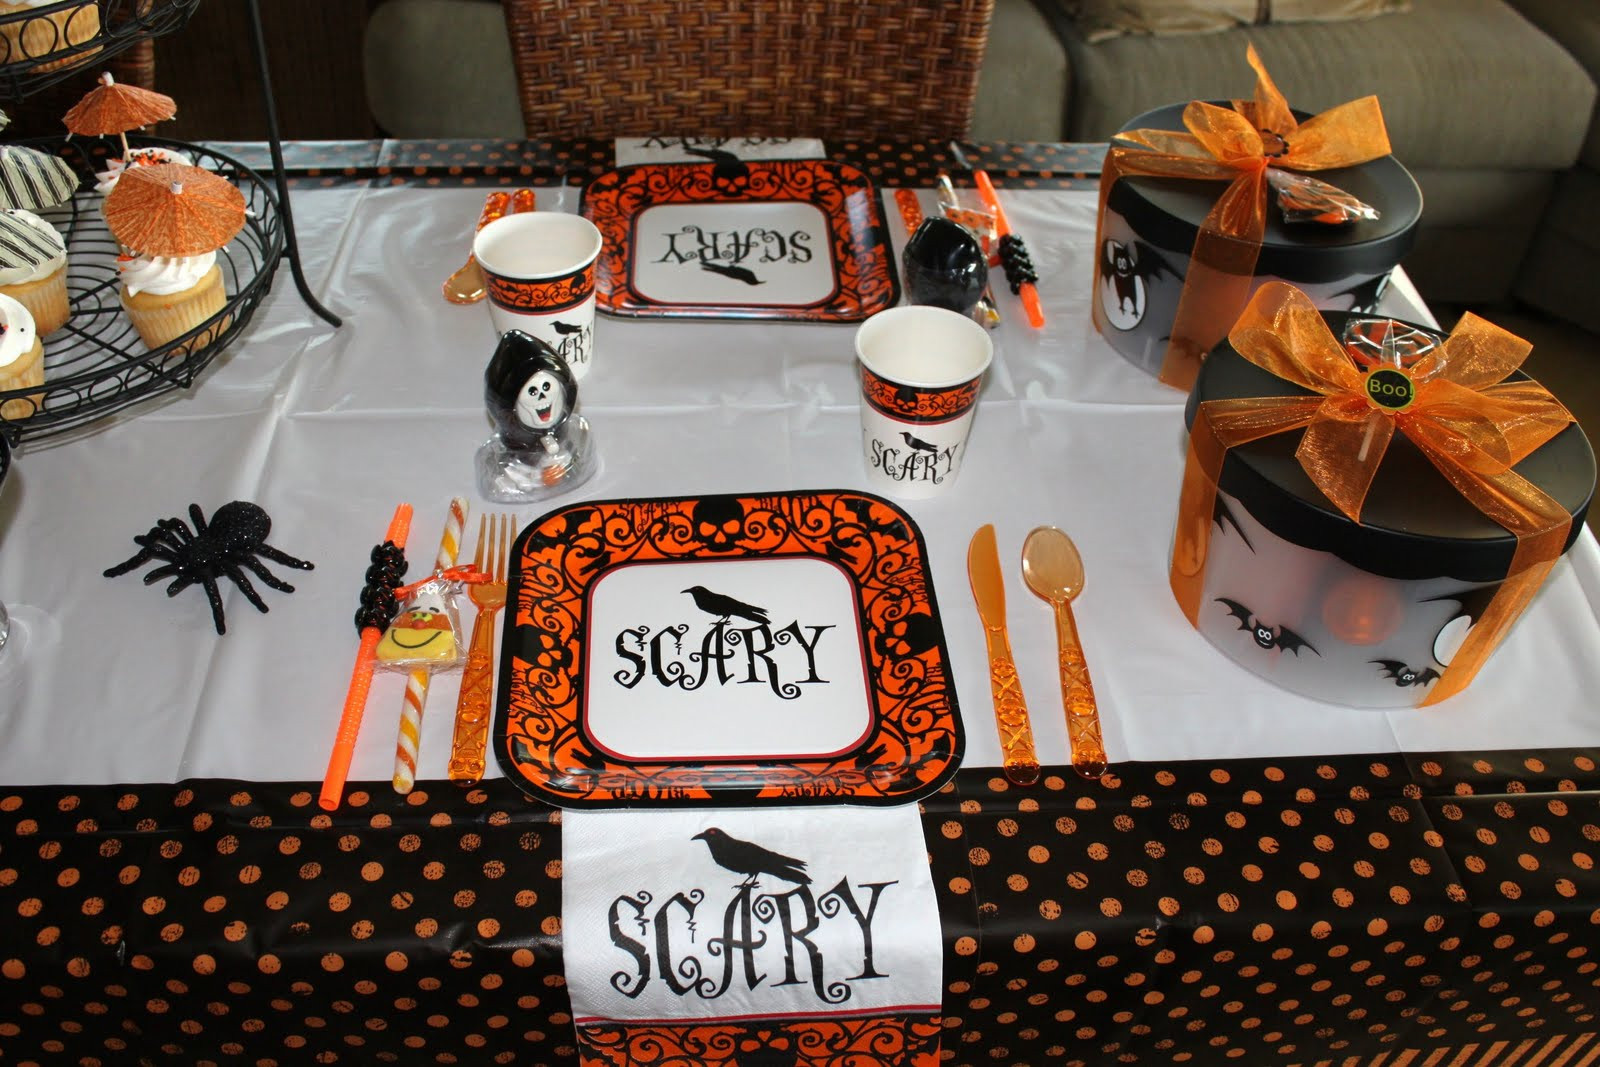 Girl Scout Halloween Party Ideas
 HUNTINGTON BEACH GIRL SCOUT TROOP 746 HALLOWEEN PARTY